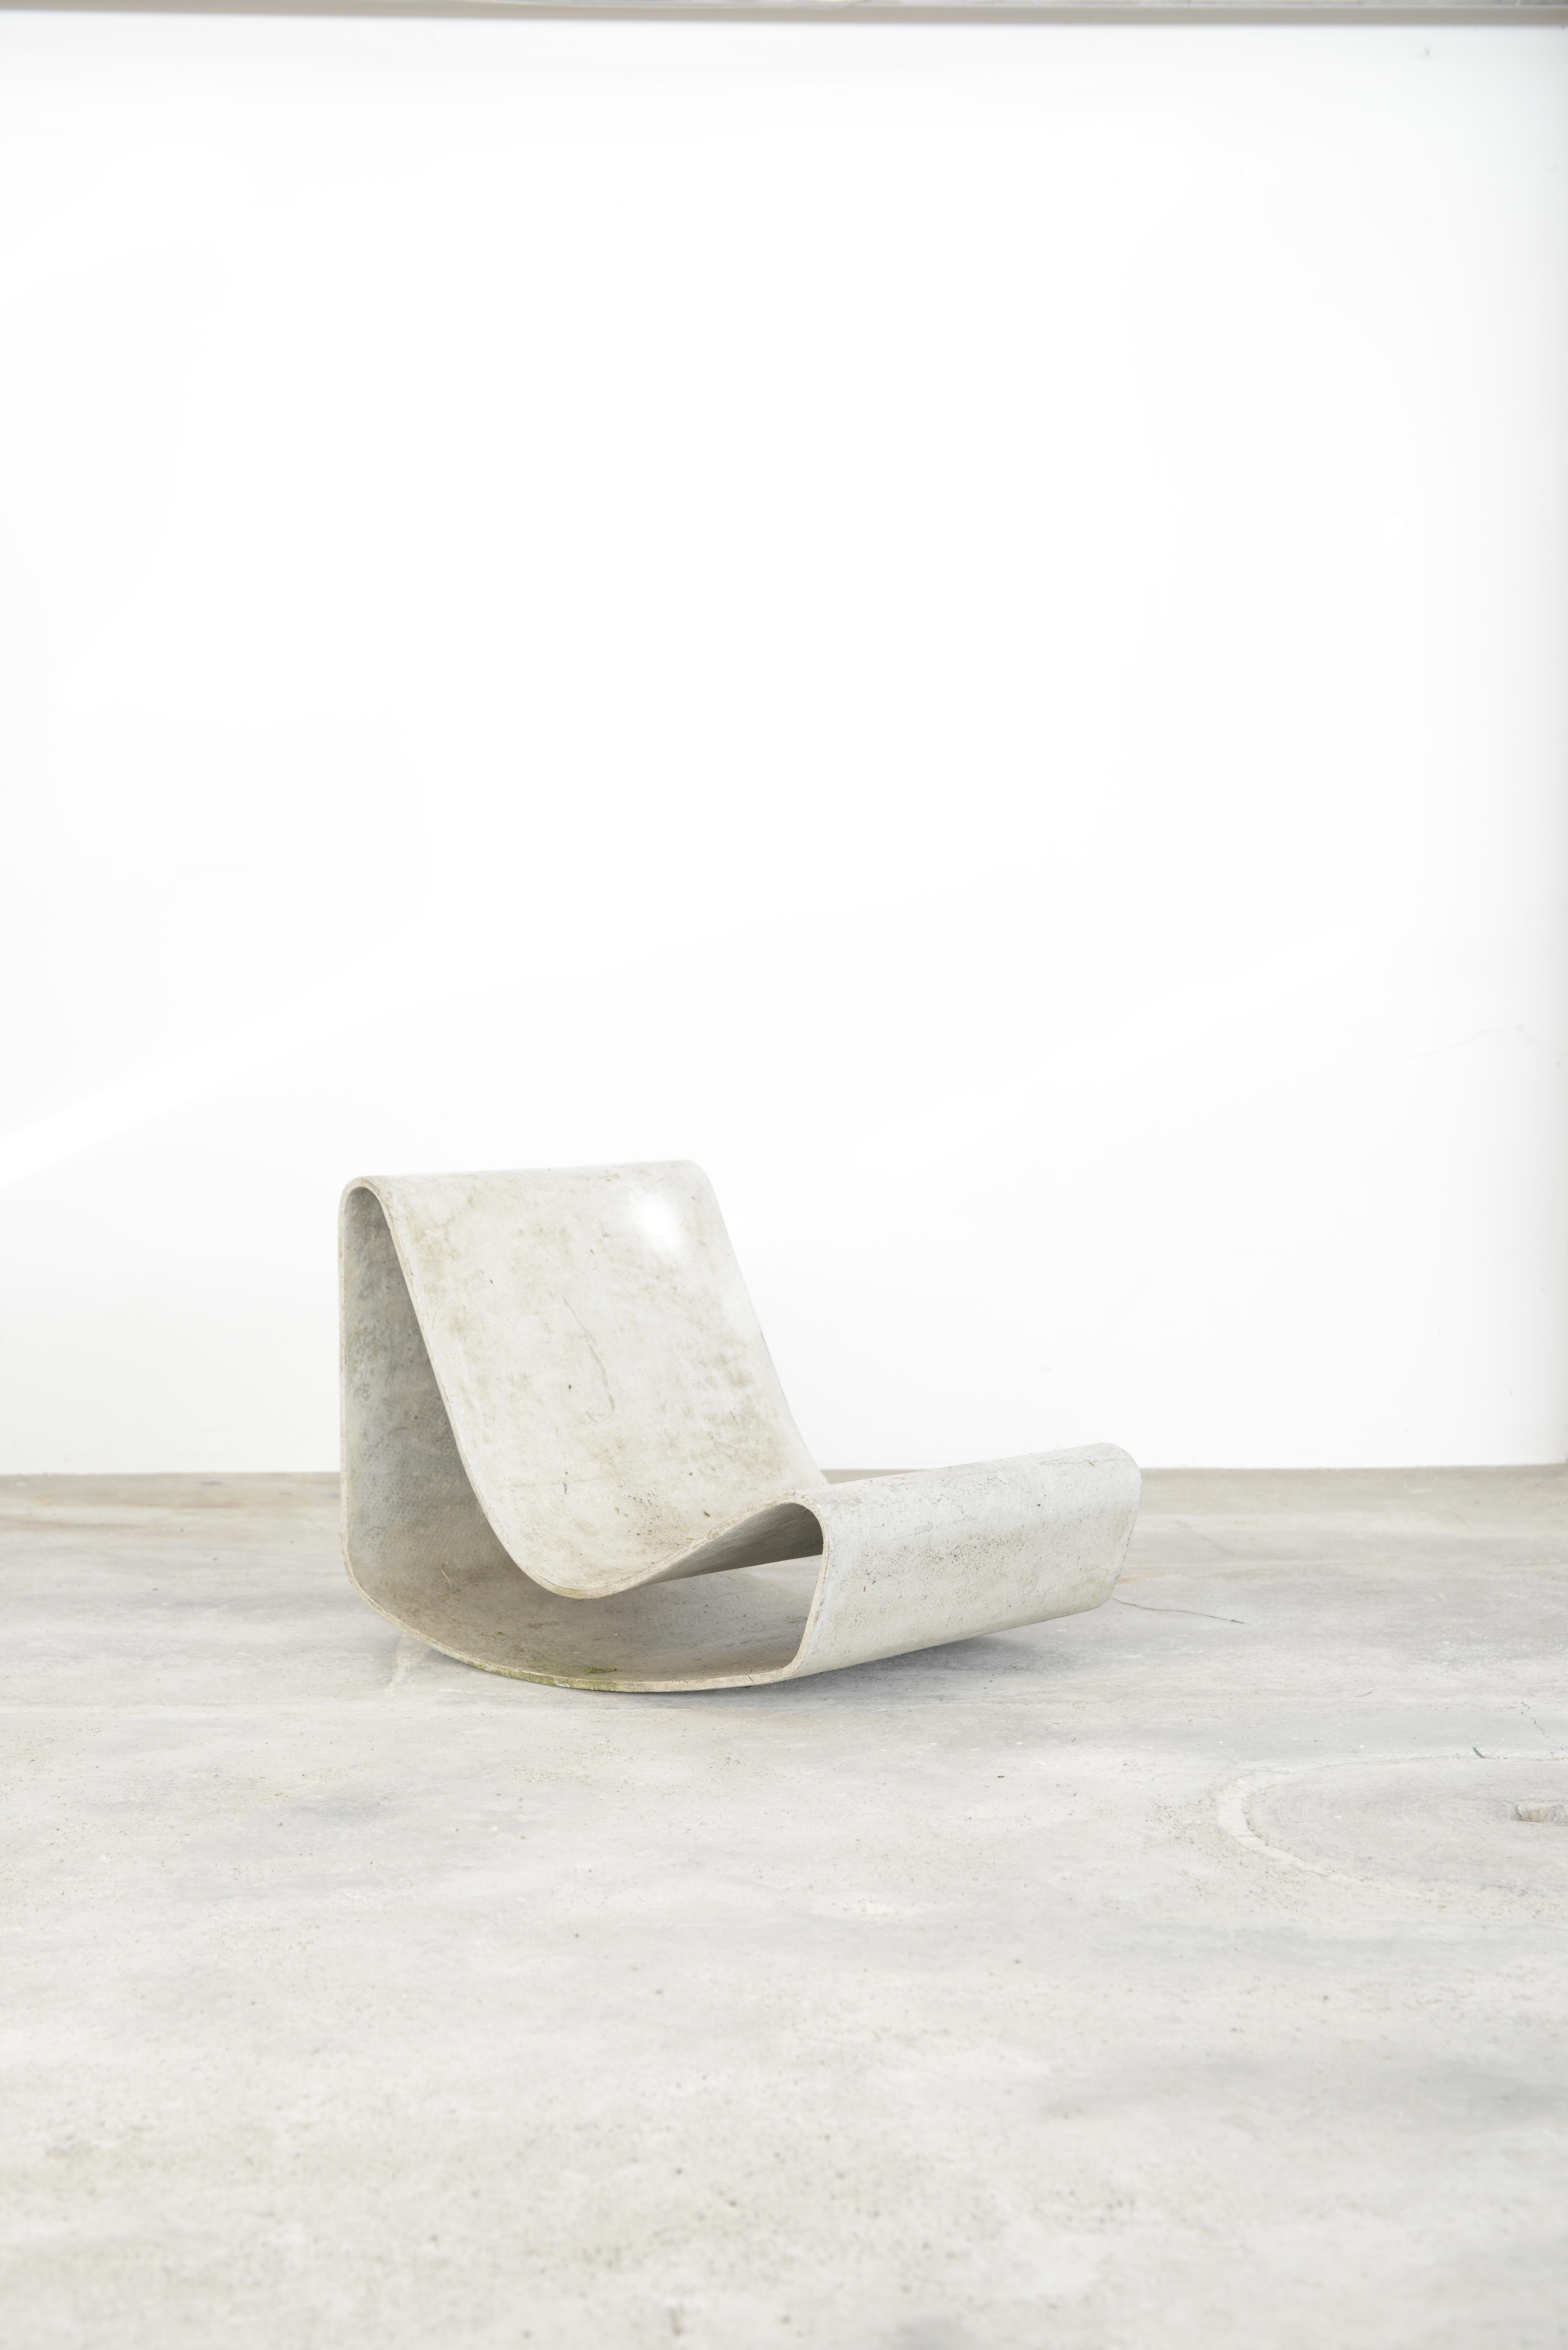 Concrete Guhl Chair by Willy Guhl '1. Edition, Special Sealed, Safe Surface'